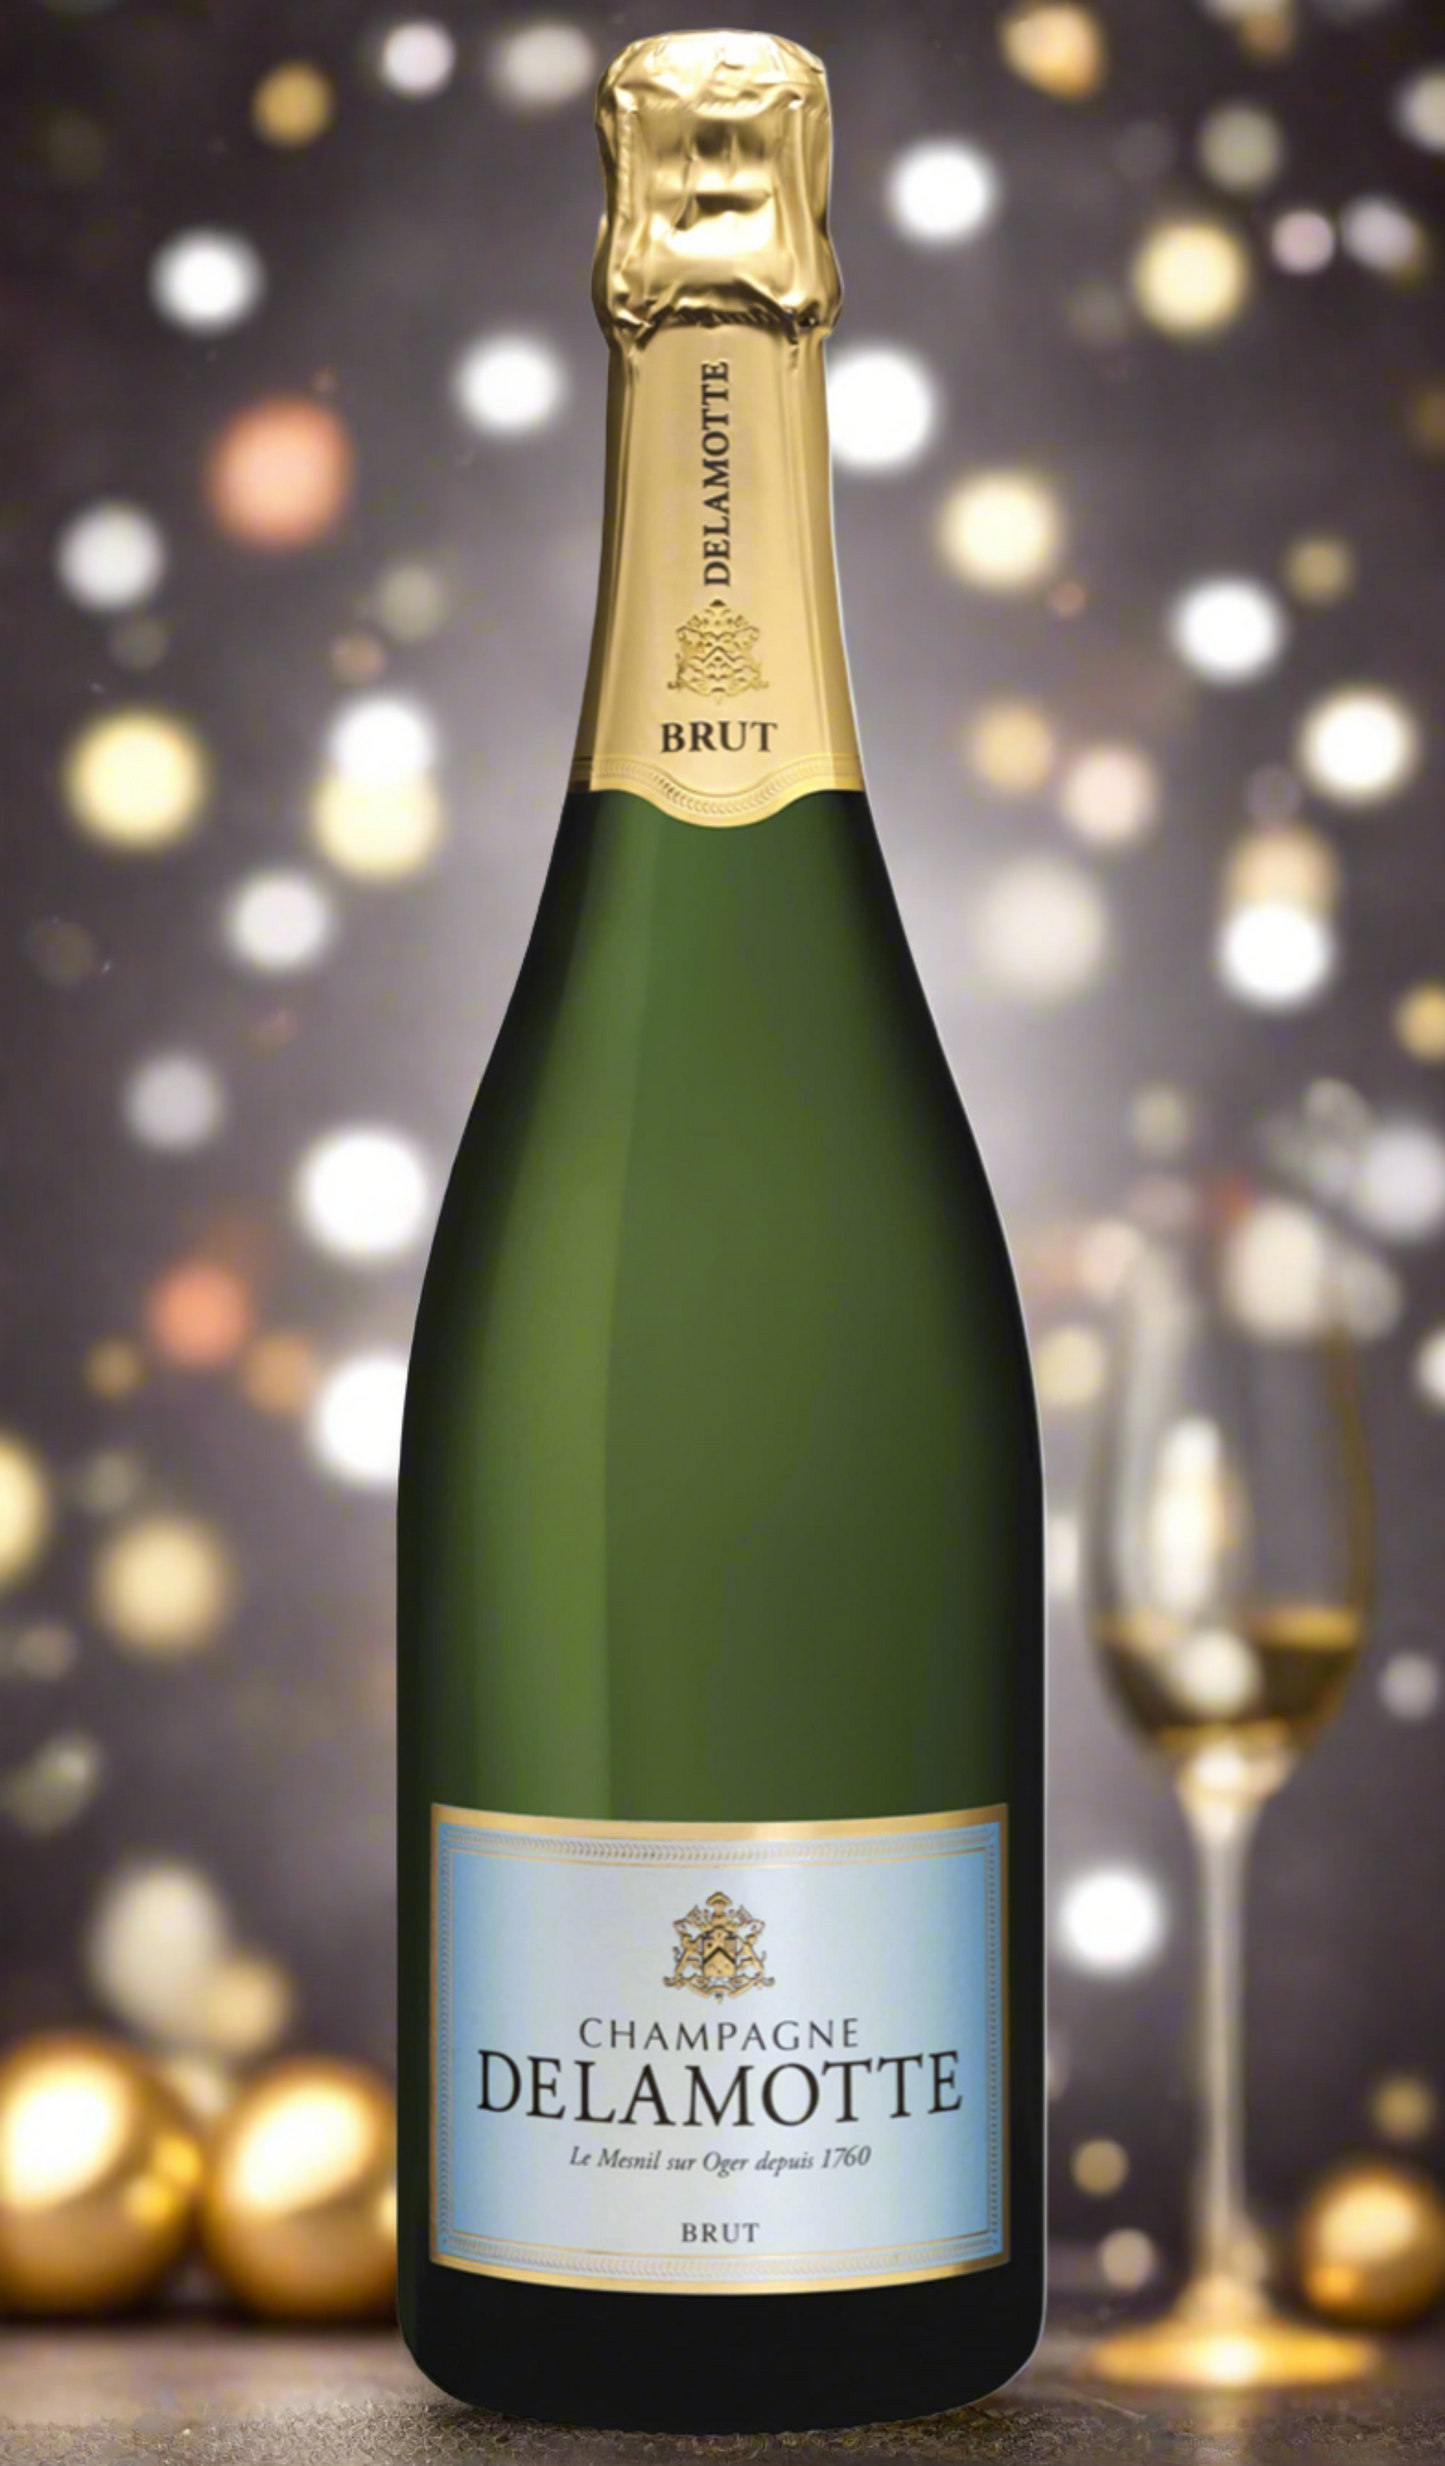 Find out more, explore our range and buy Delamotte Champagne Brut NV 750mL (France) available online at Wine Sellers Direct - Australia's independent liquor specialists.